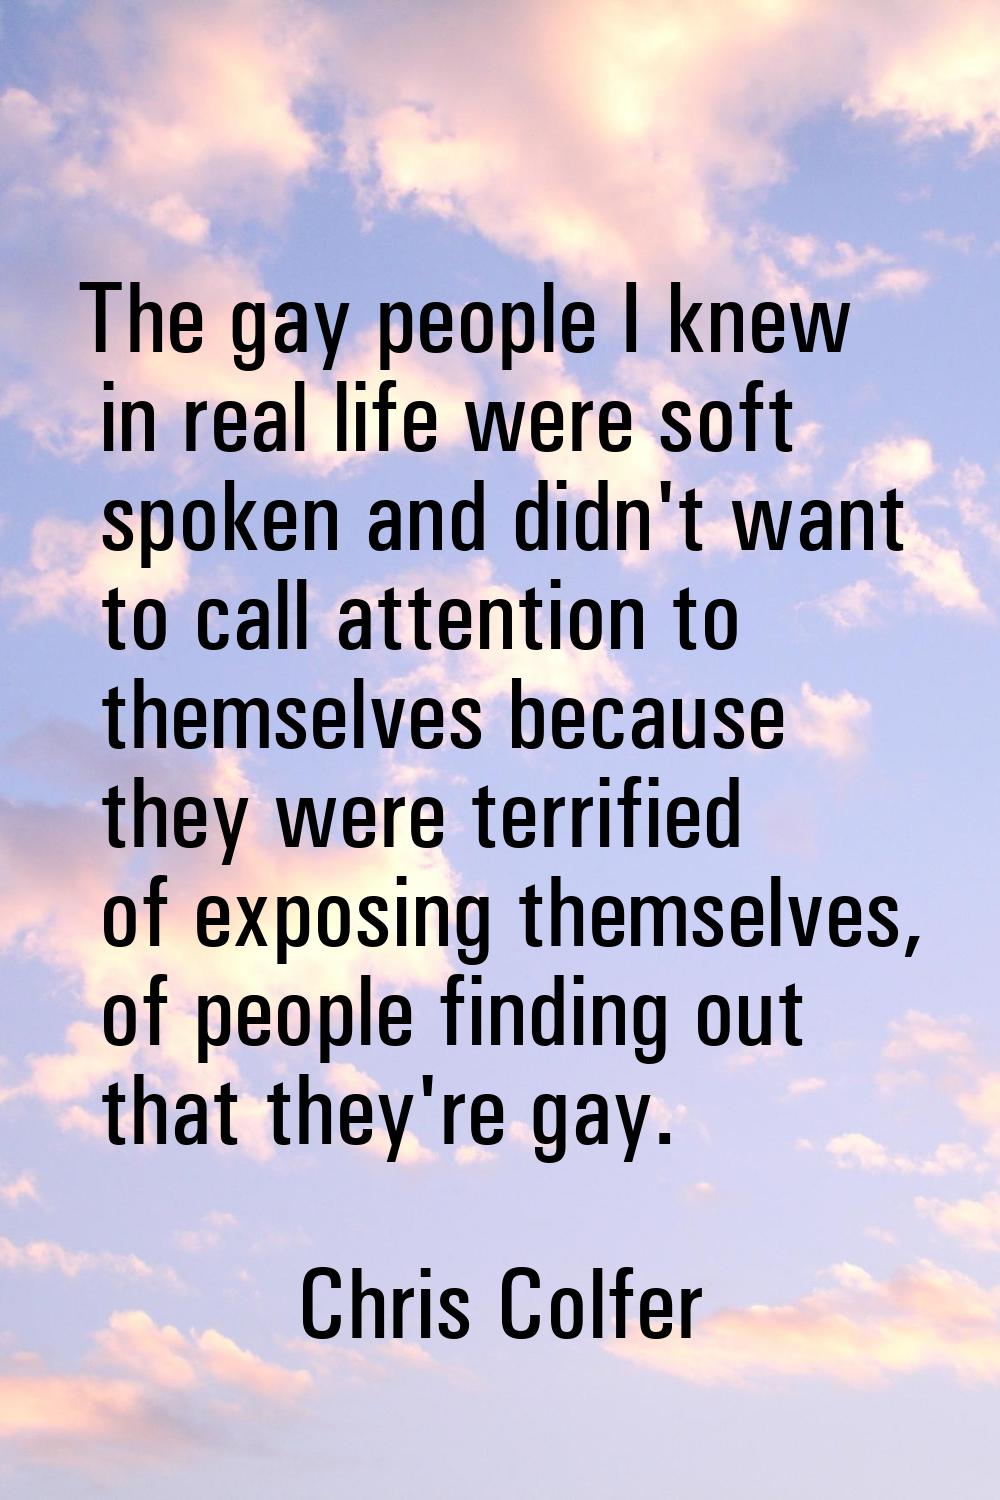 The gay people I knew in real life were soft spoken and didn't want to call attention to themselves